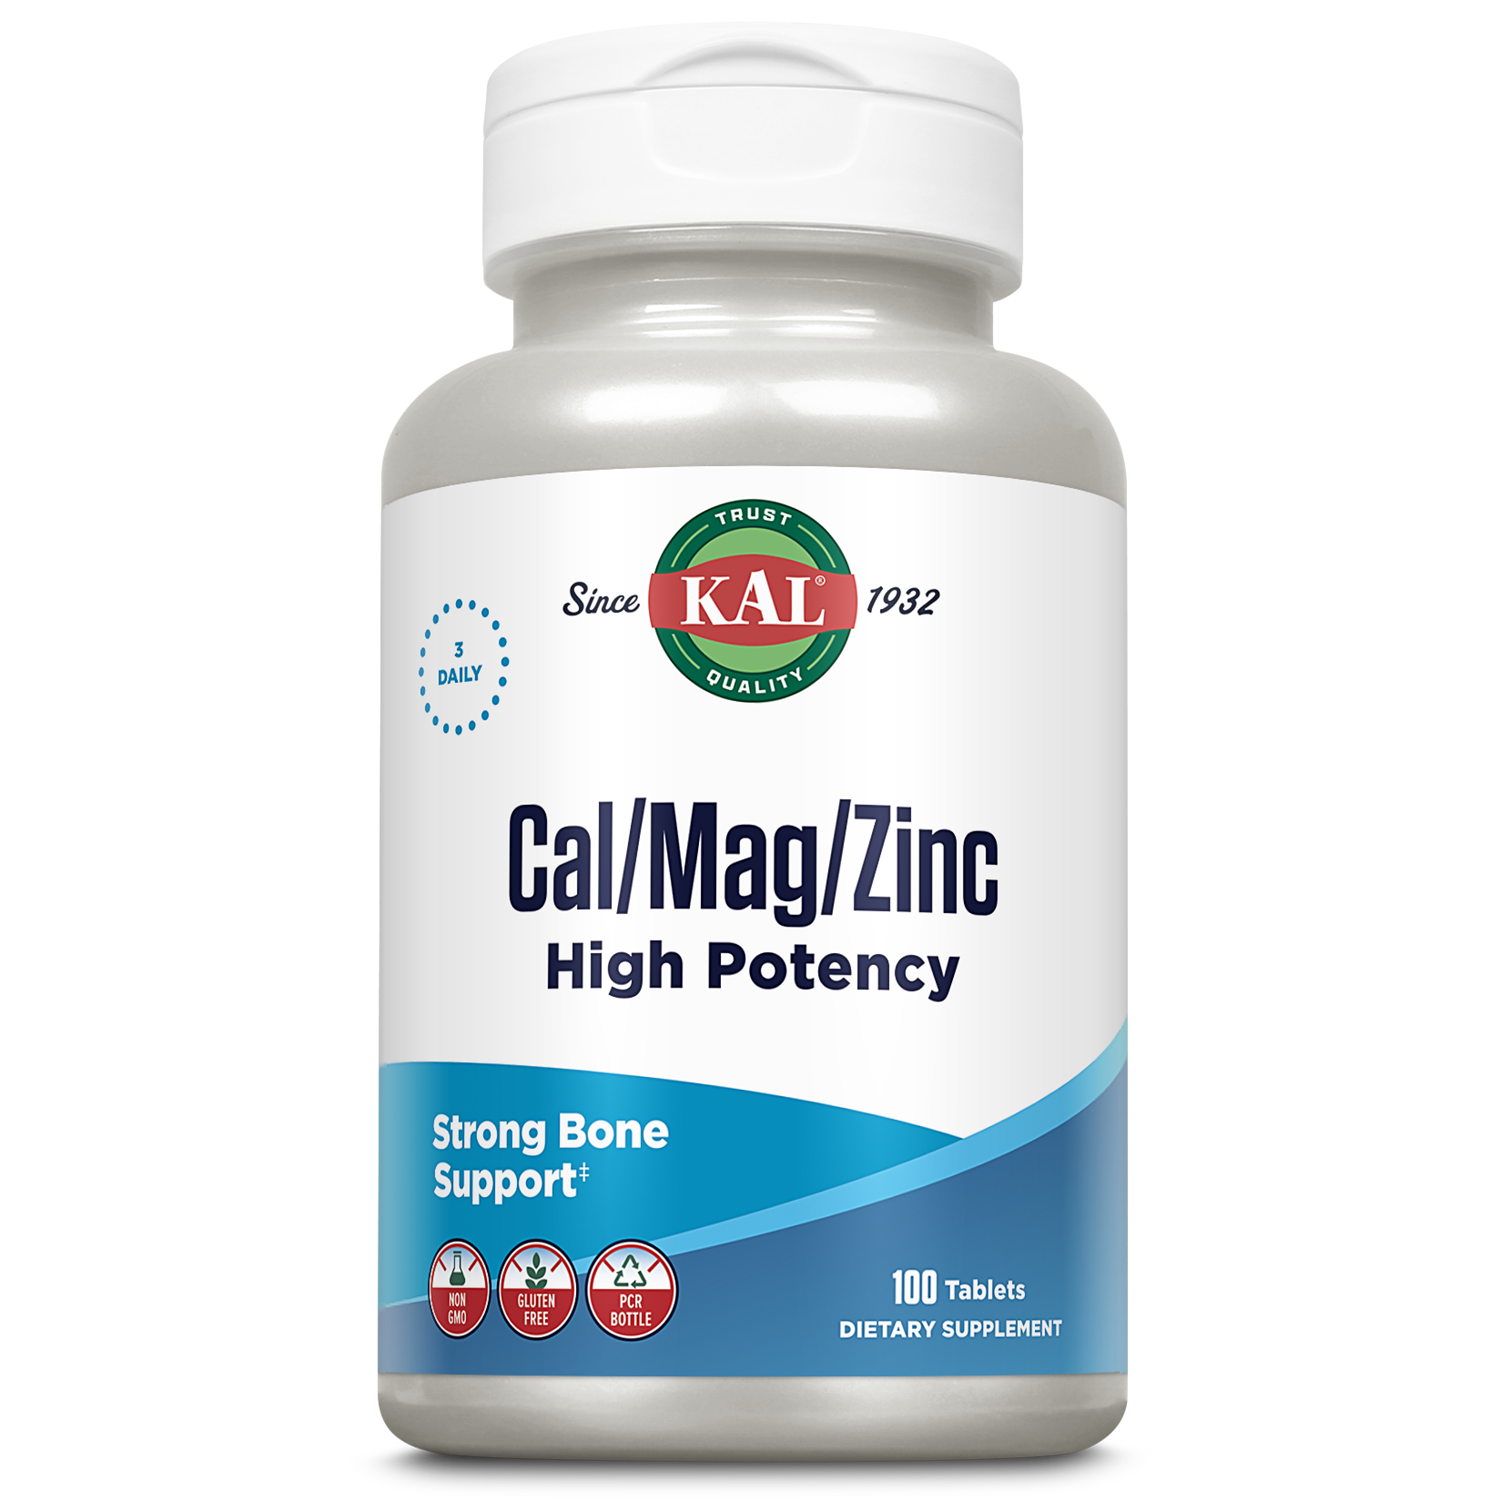 KAL Cal/Mag/Zinc | 1000 mg of Calcium, 400 mg of Magnesium & 15 mg of Zinc | Healthy Bones, Muscle, Heart & Immune Function Support | 100 Tablets - image 1 of 5